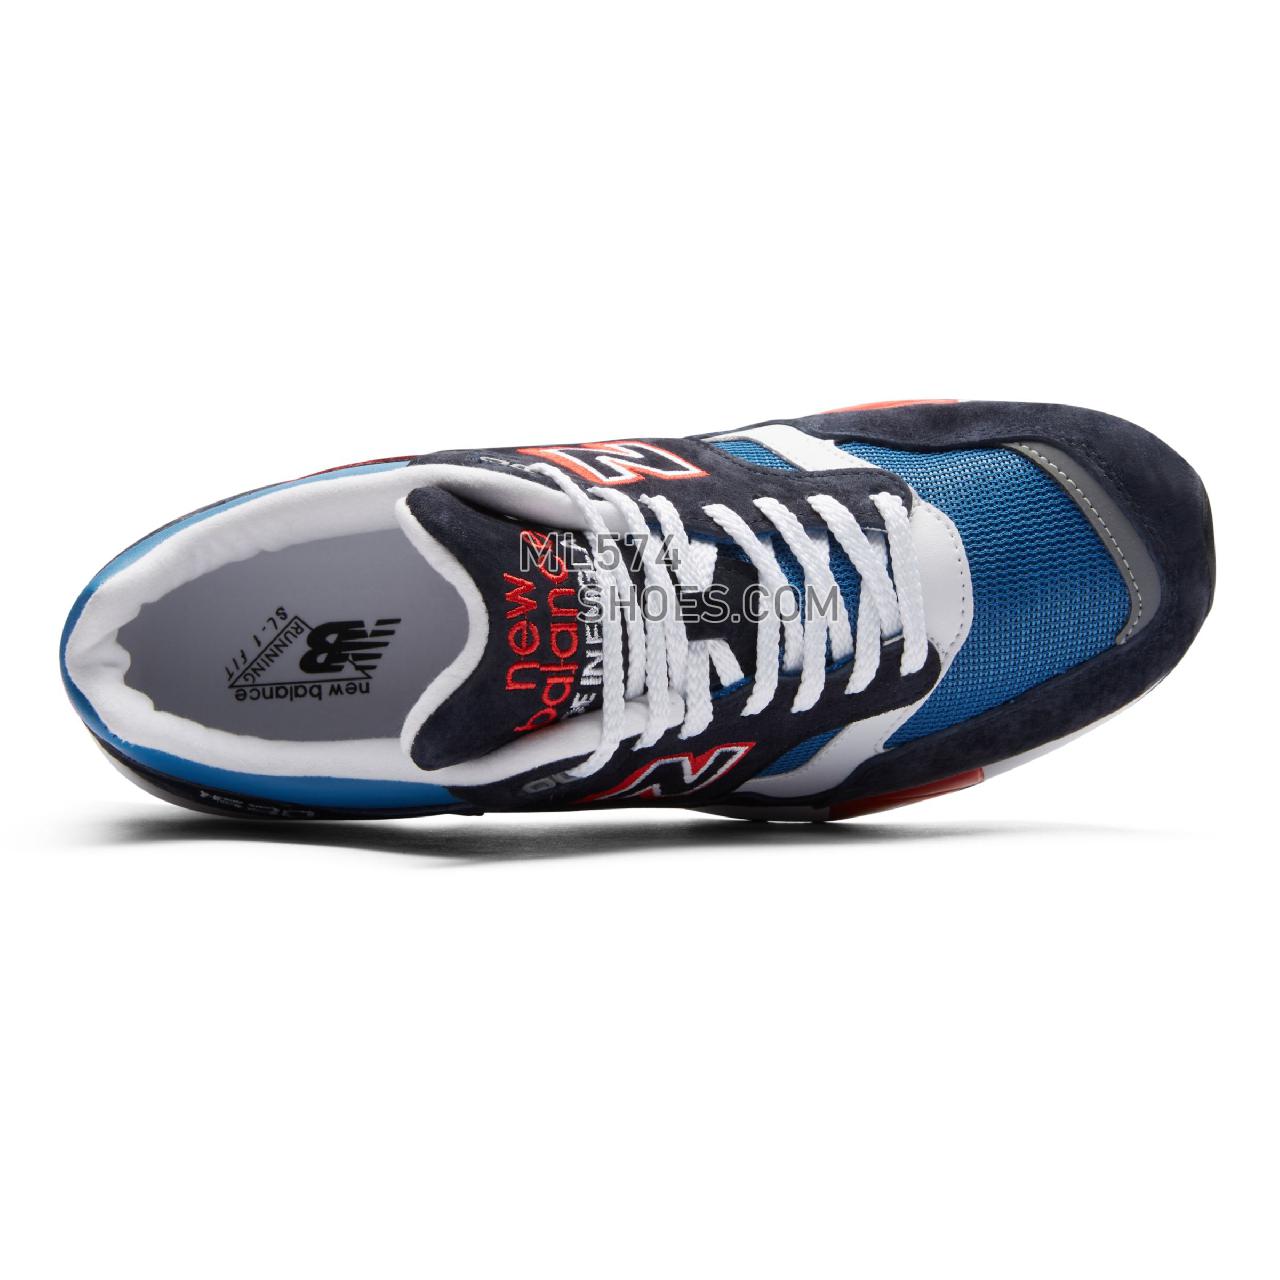 New Balance Made in UK 1530 - Men's Made in UK 1530 ML1530V1-23753-M - Navy with Blue and Red - M1530NBR